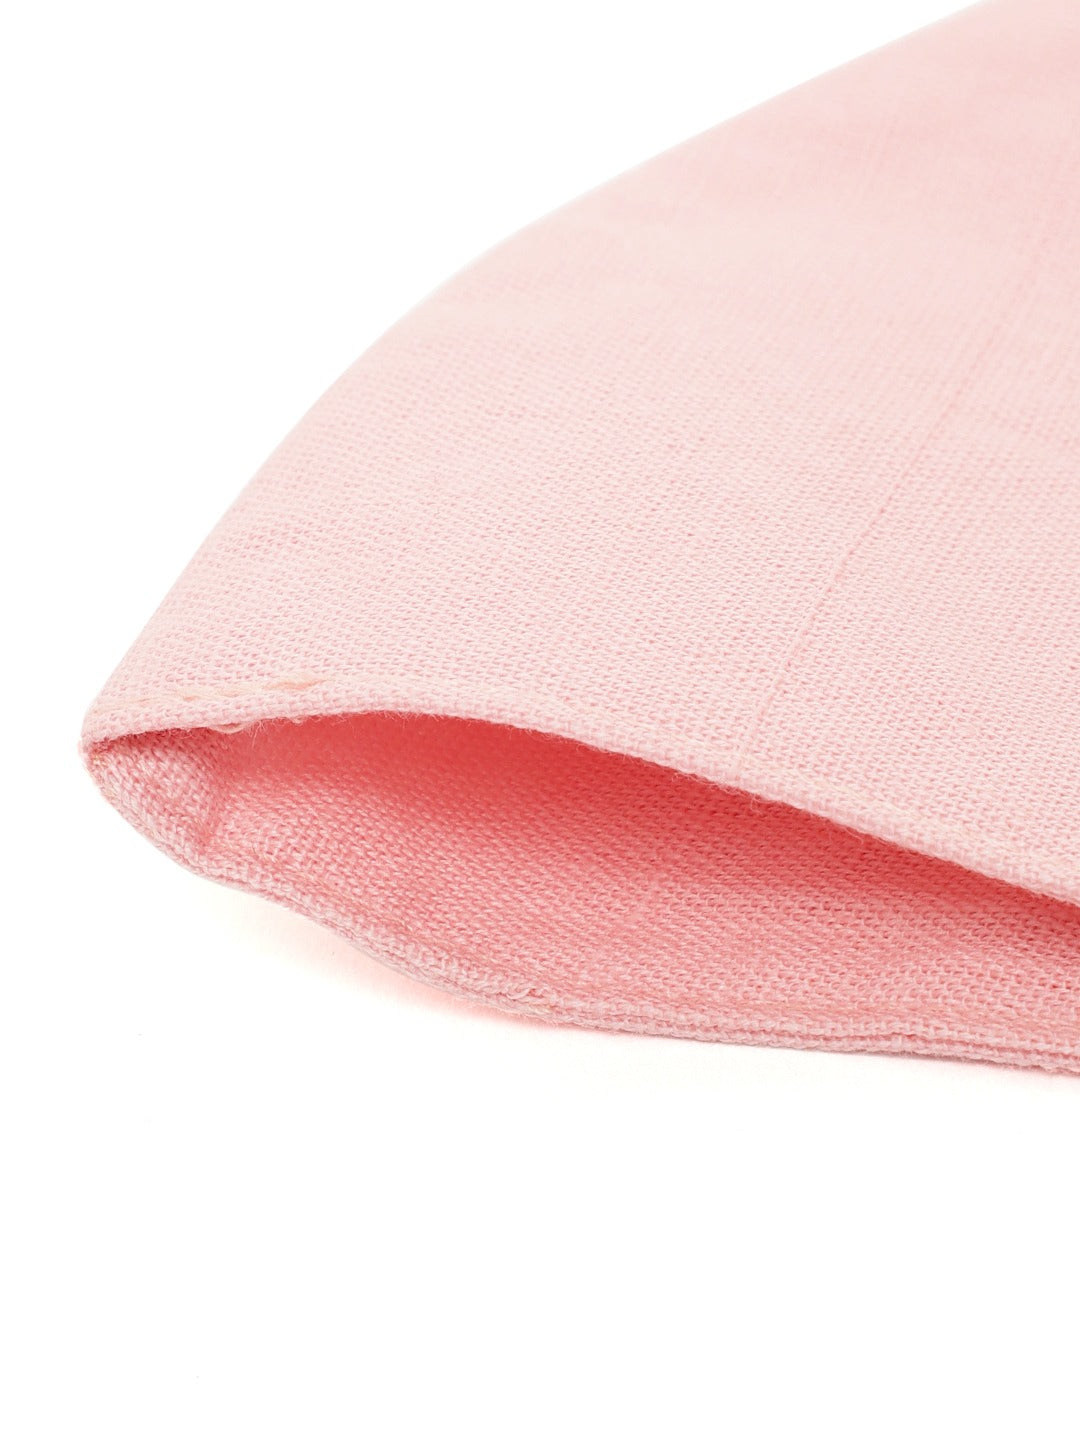 Blueberry Pink solid 2 ply cotton reusable chain mask